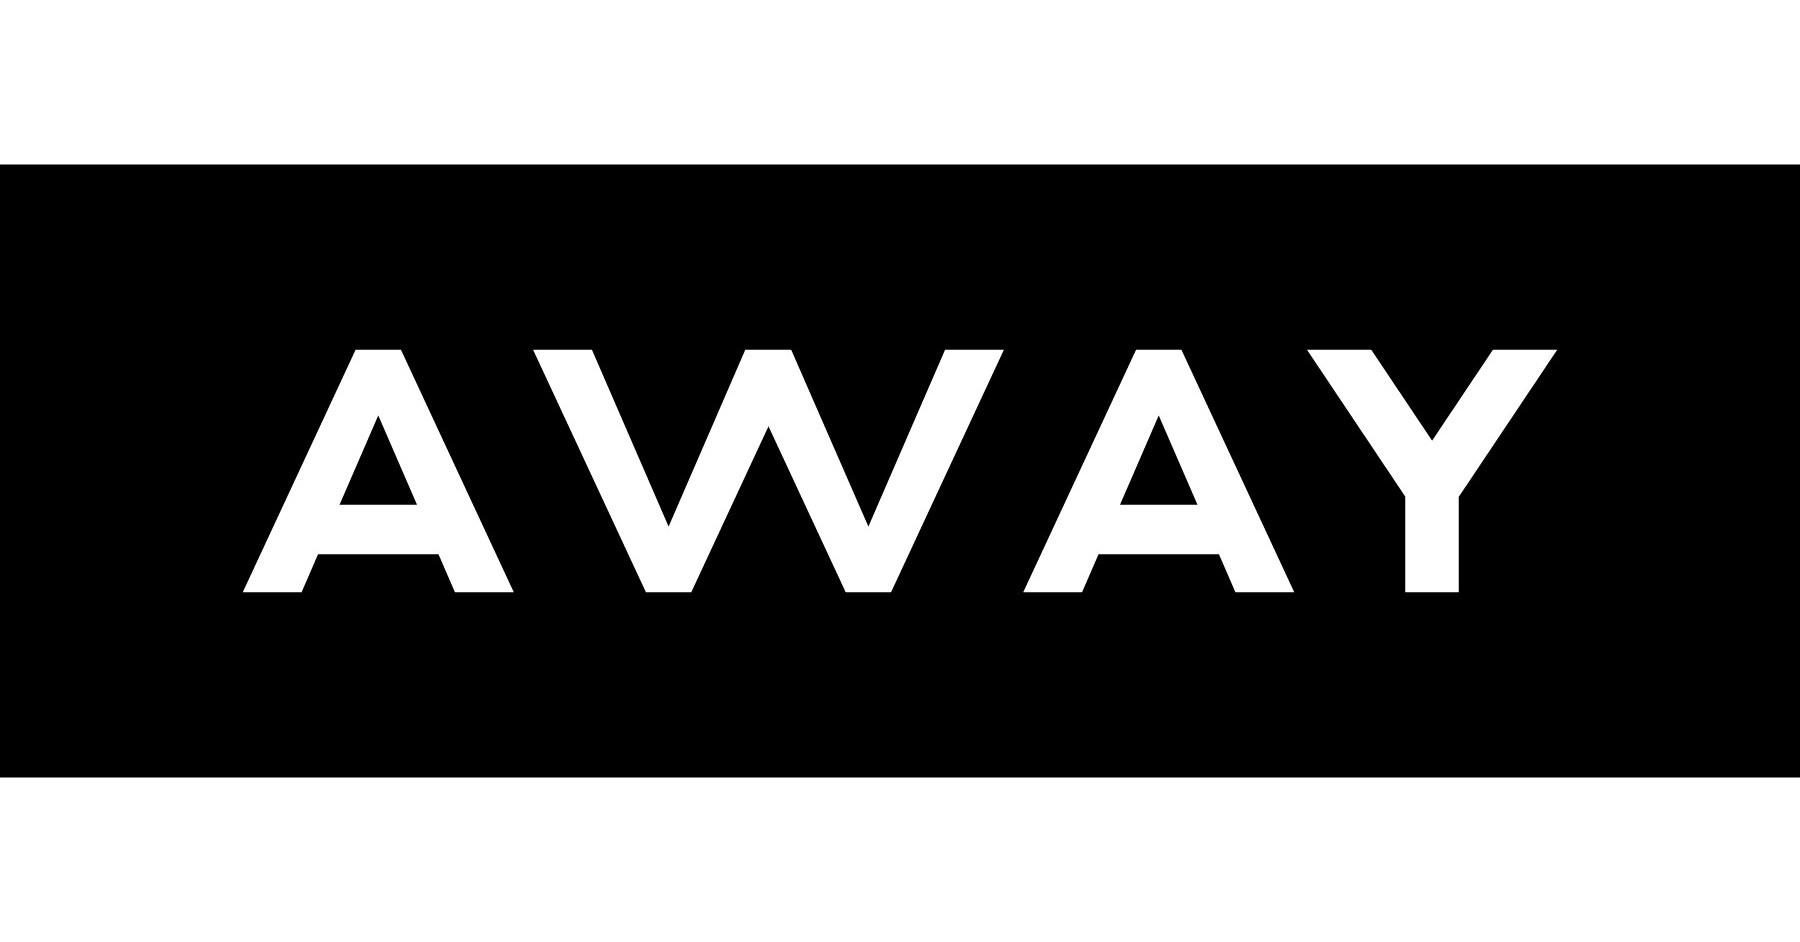 About  Away: Built for modern travel